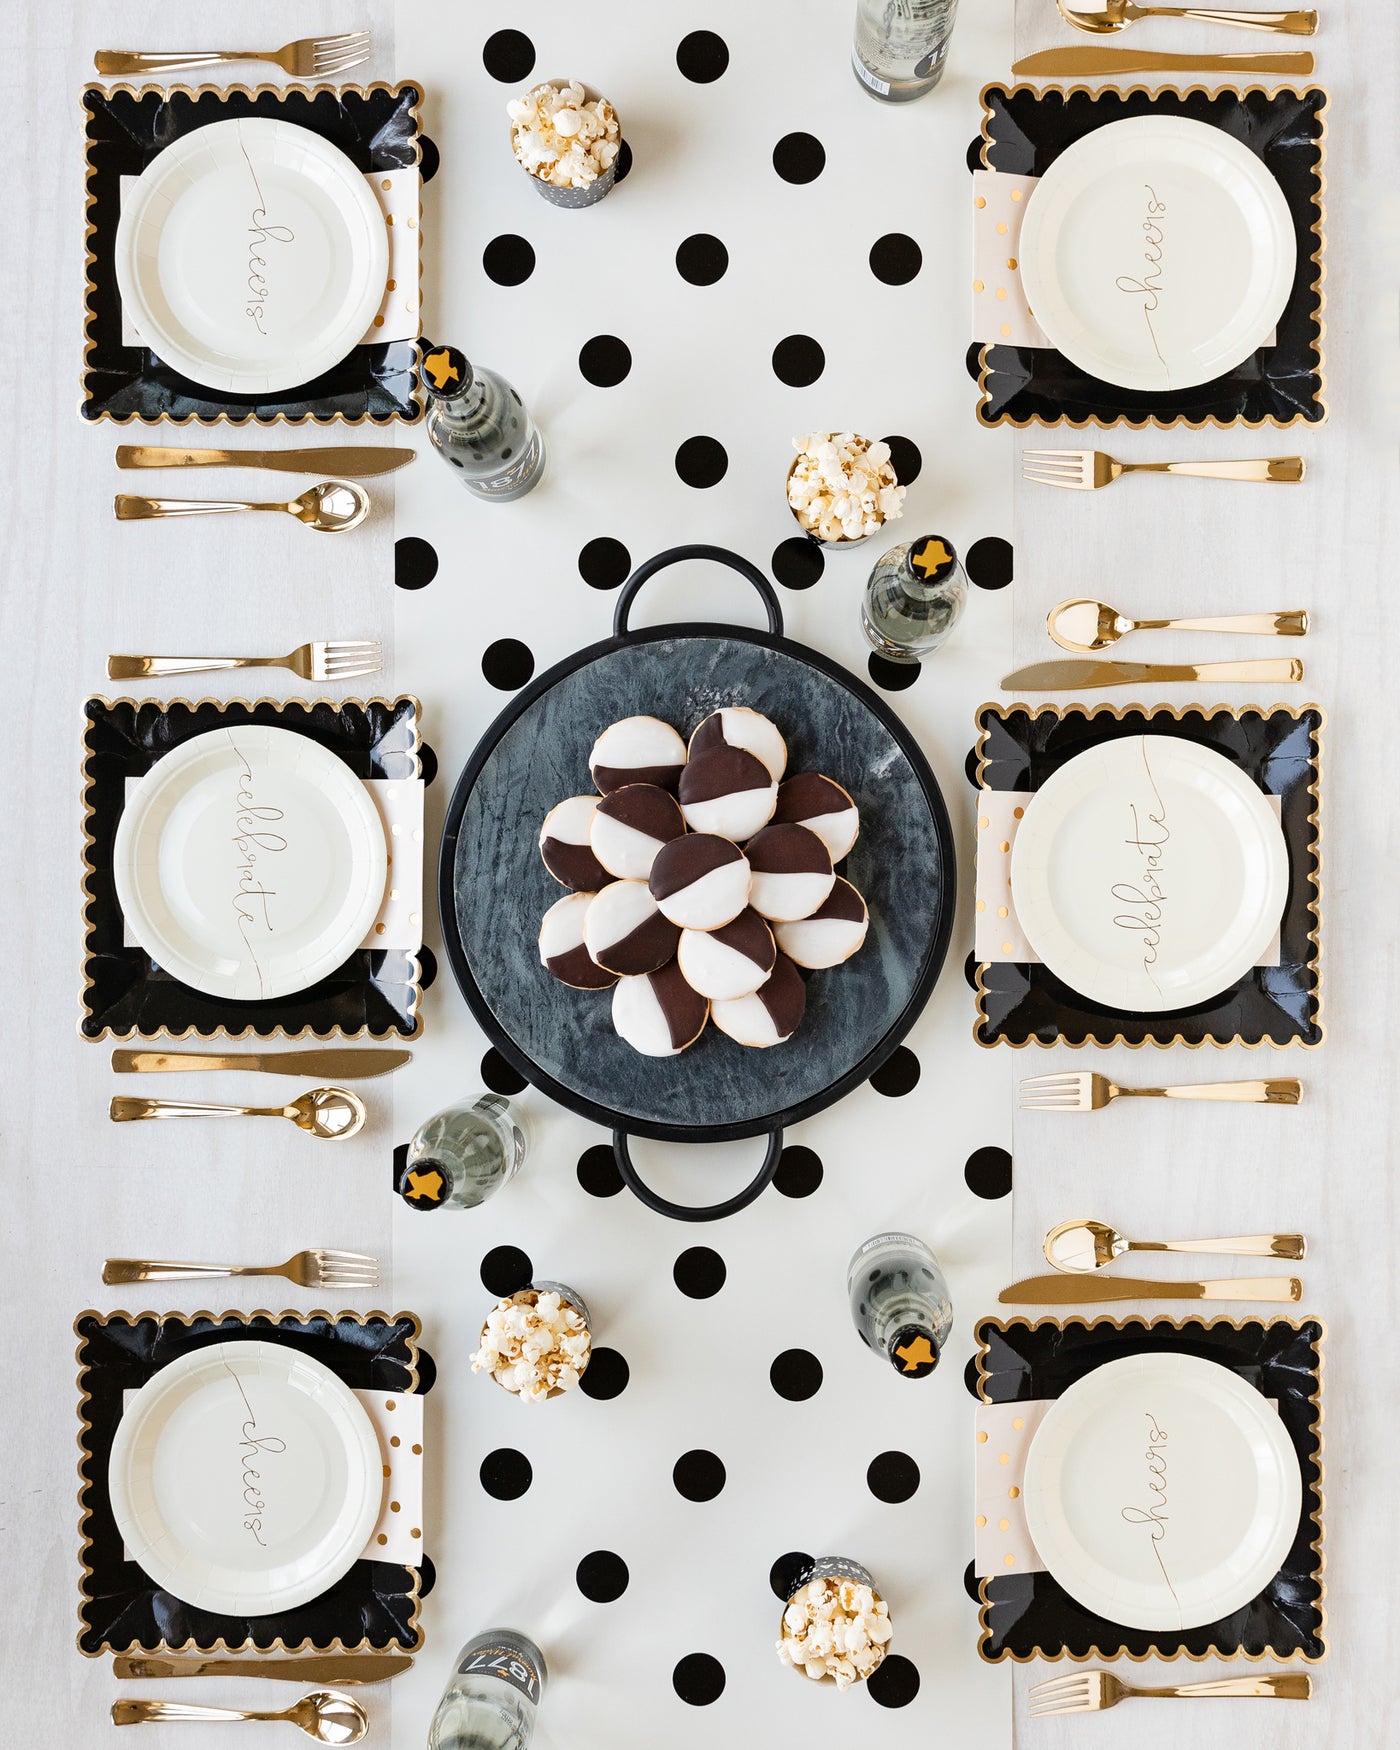 PGB816 - Cream with Black Dots Paper Table Runner